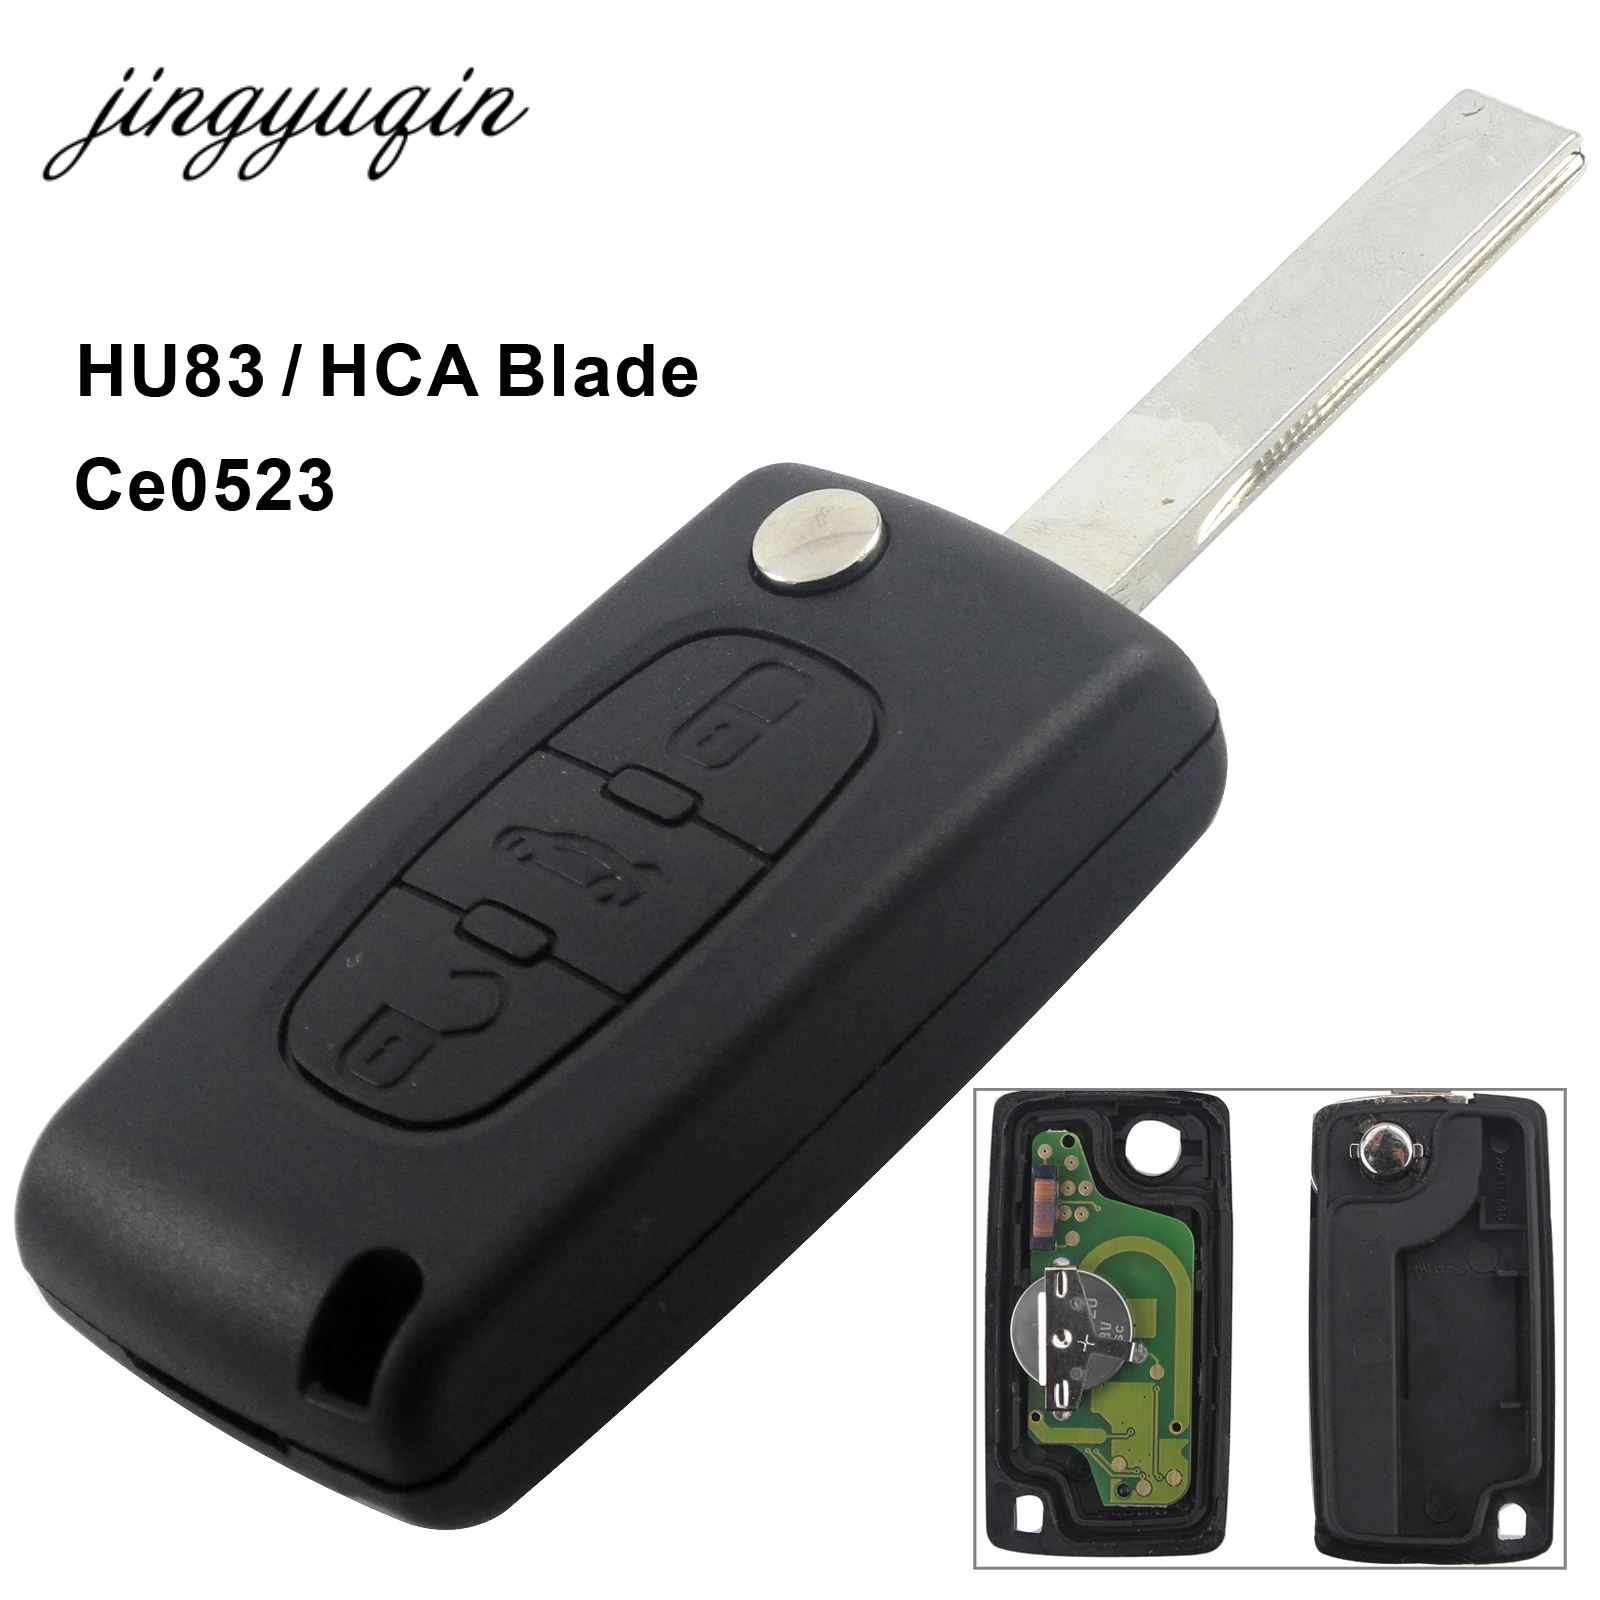 CE0536 Flip key shell 3 button middle trunk VA2/HU83 blade for